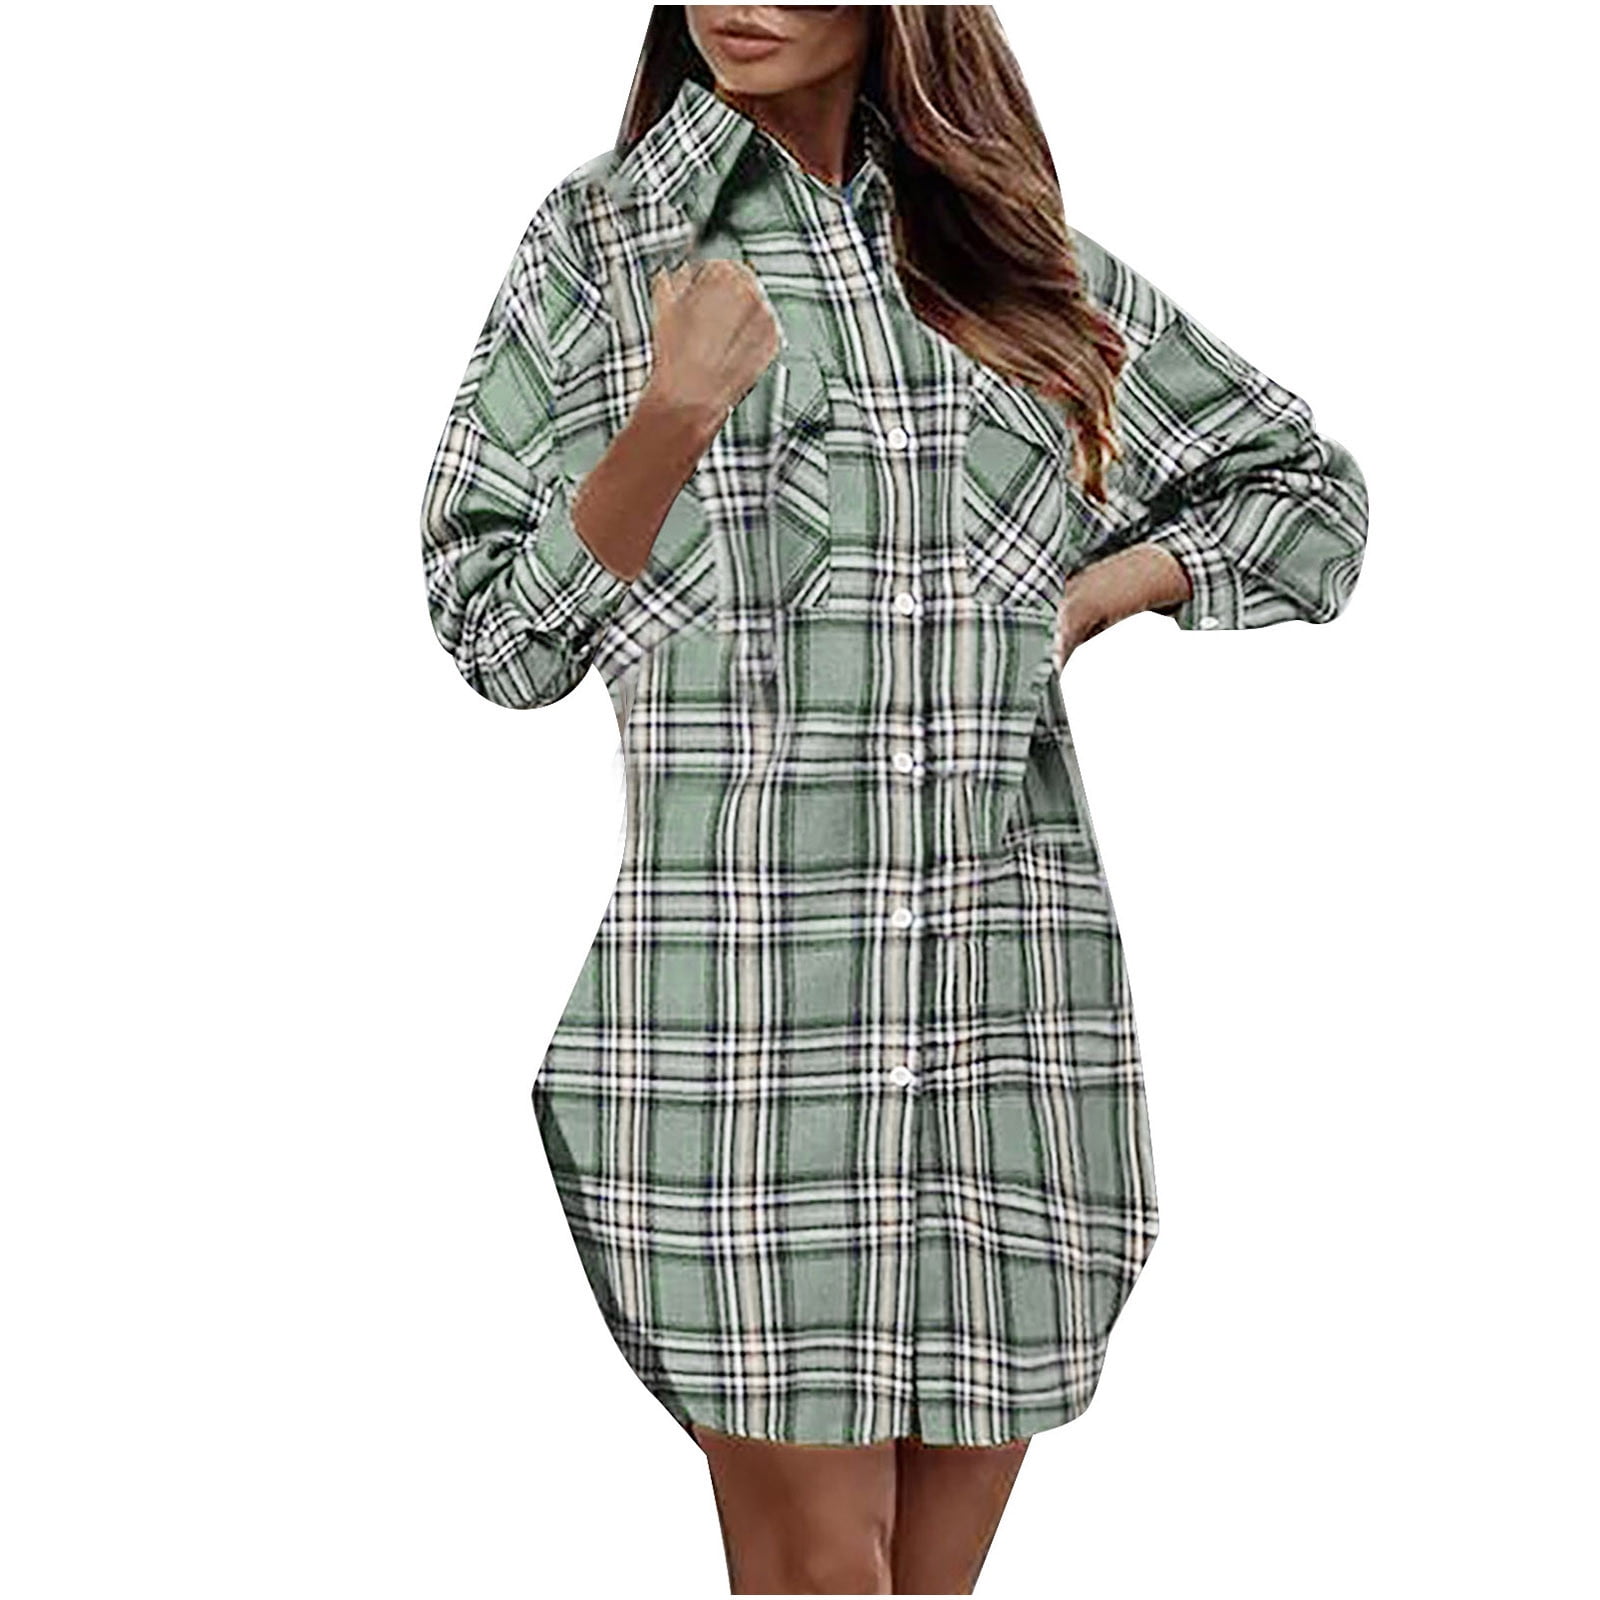 Women's Flannel Plaid Shirt Dress Casual Lapel Long Sleeves Button Down  Tunic Blouses Tops Fashion Loose Mini Dress with Pockets 